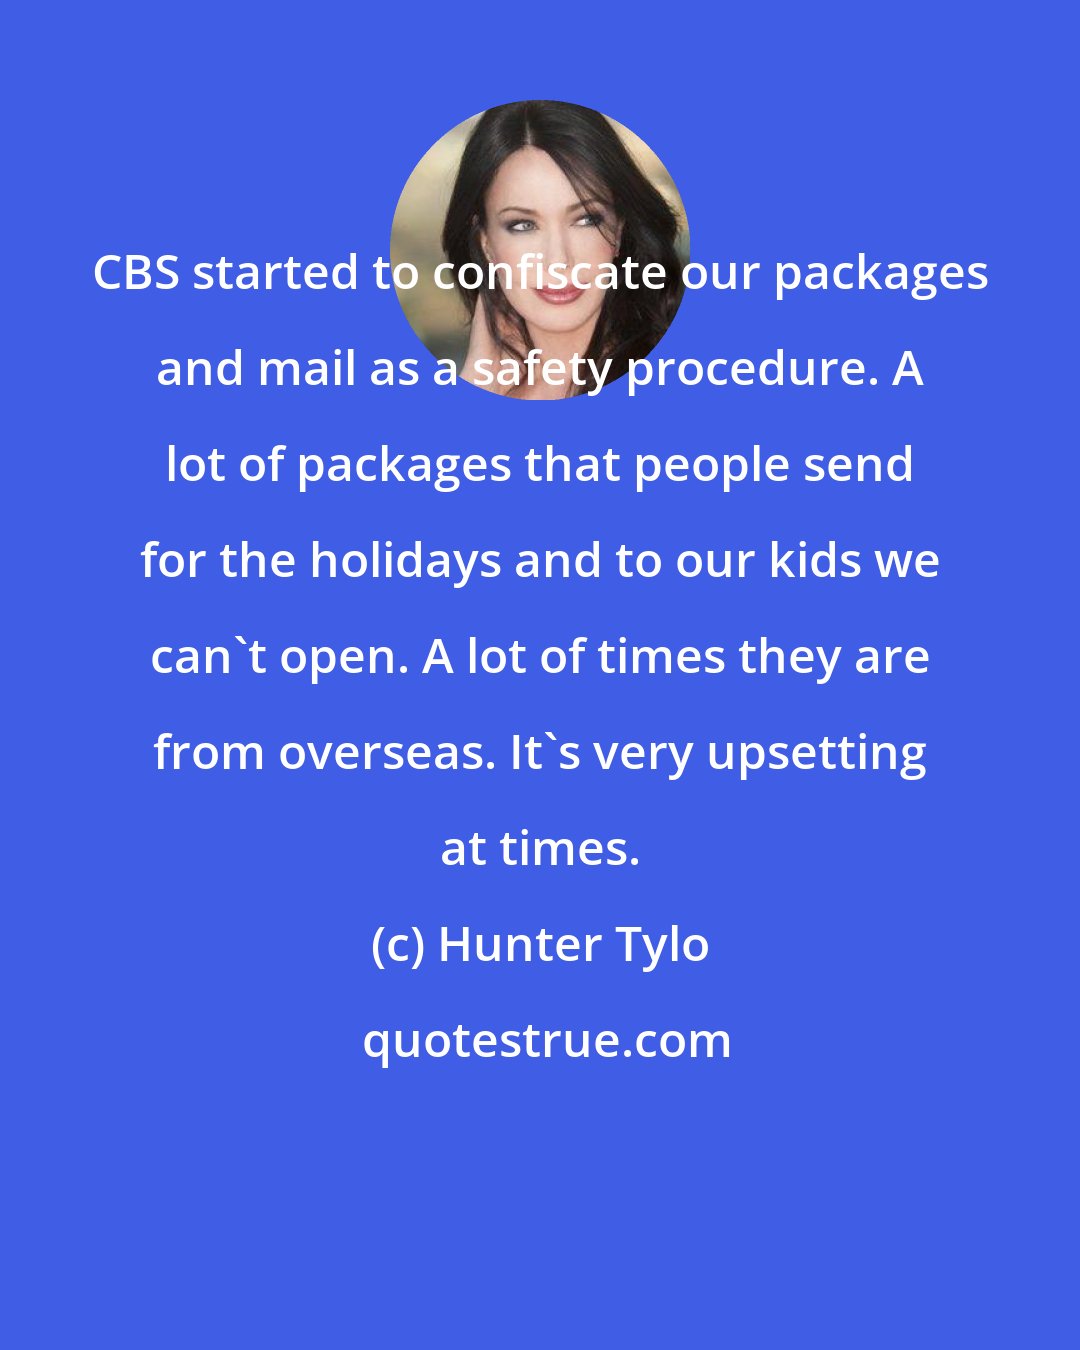 Hunter Tylo: CBS started to confiscate our packages and mail as a safety procedure. A lot of packages that people send for the holidays and to our kids we can't open. A lot of times they are from overseas. It's very upsetting at times.